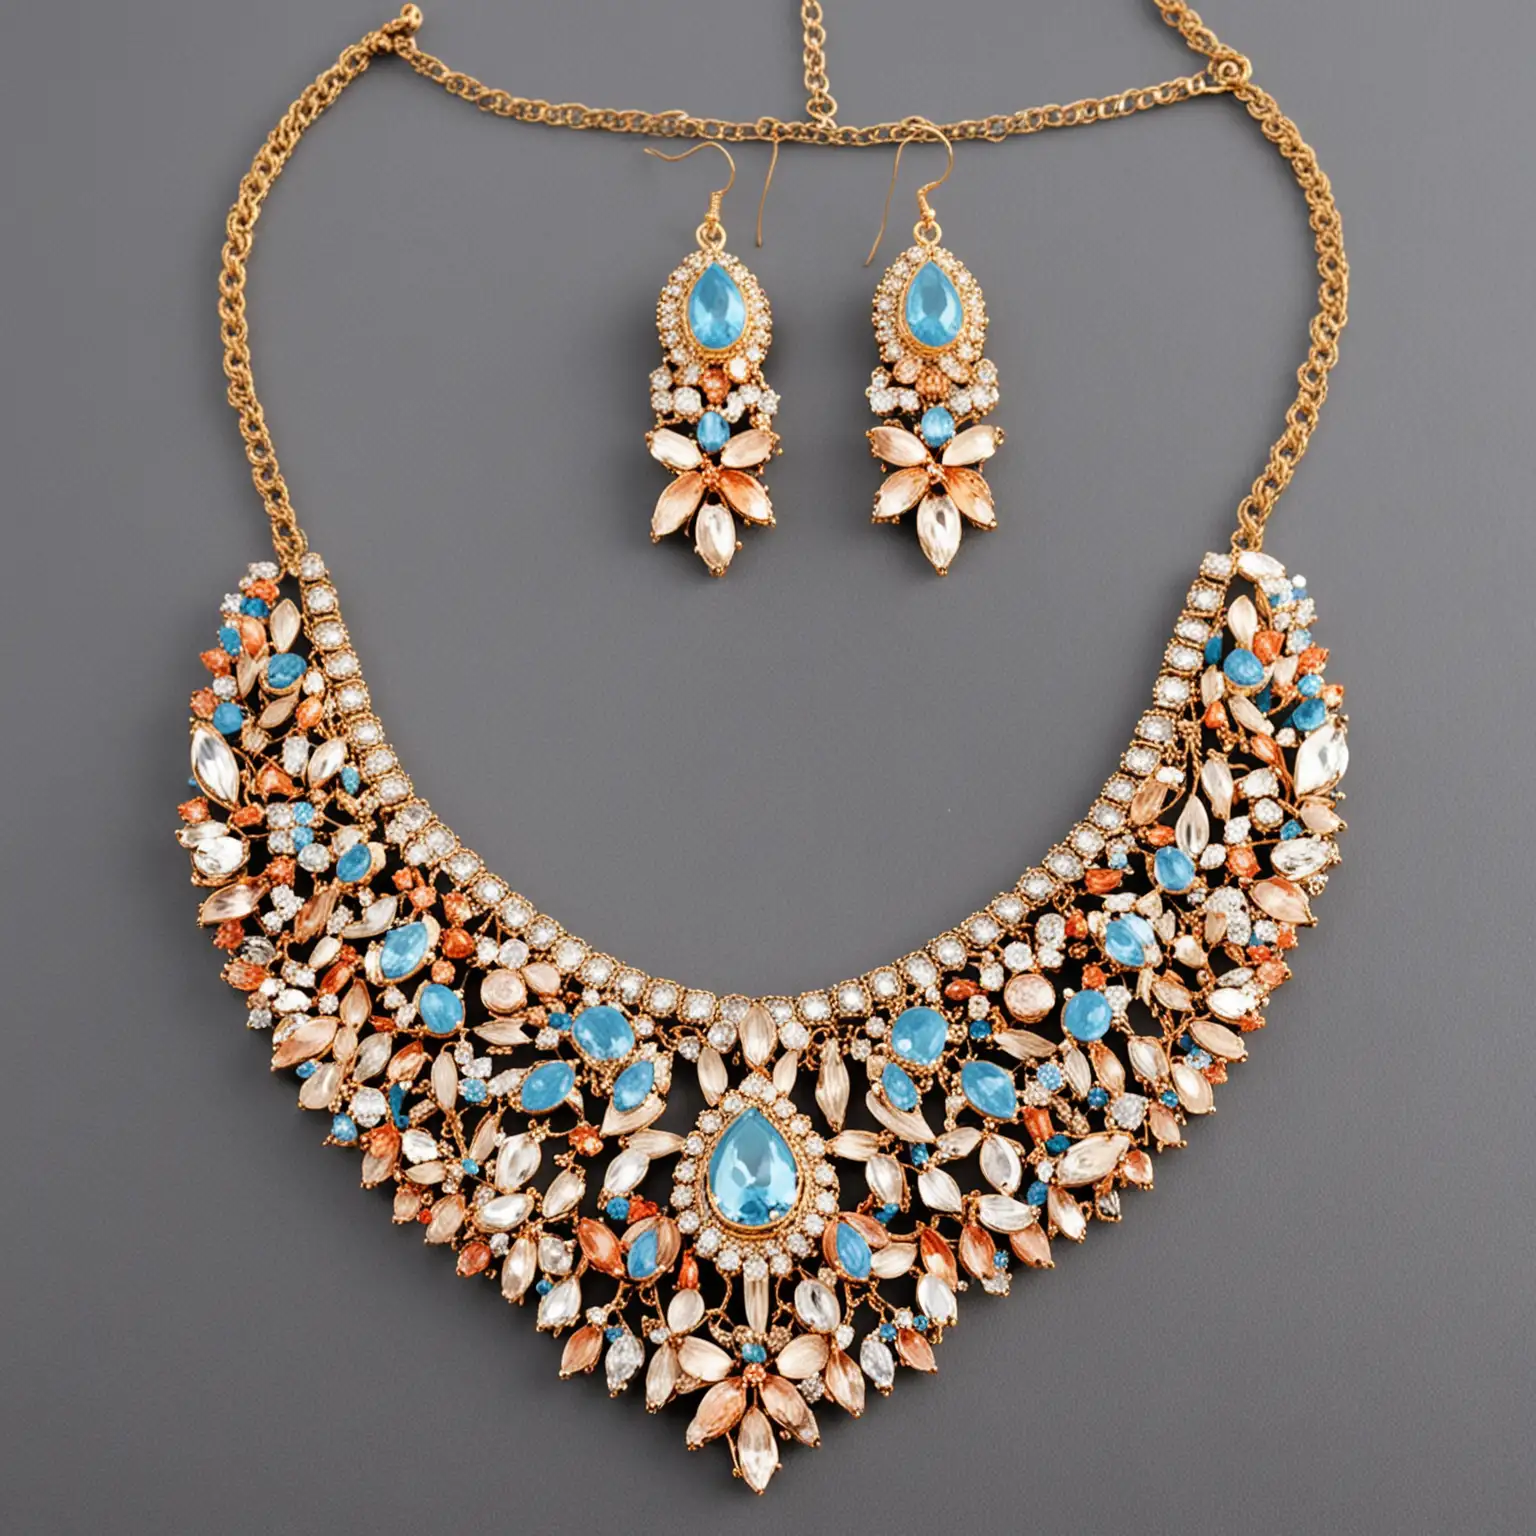 Stylish Fashion Necklaces and Earrings for Party Ensemble